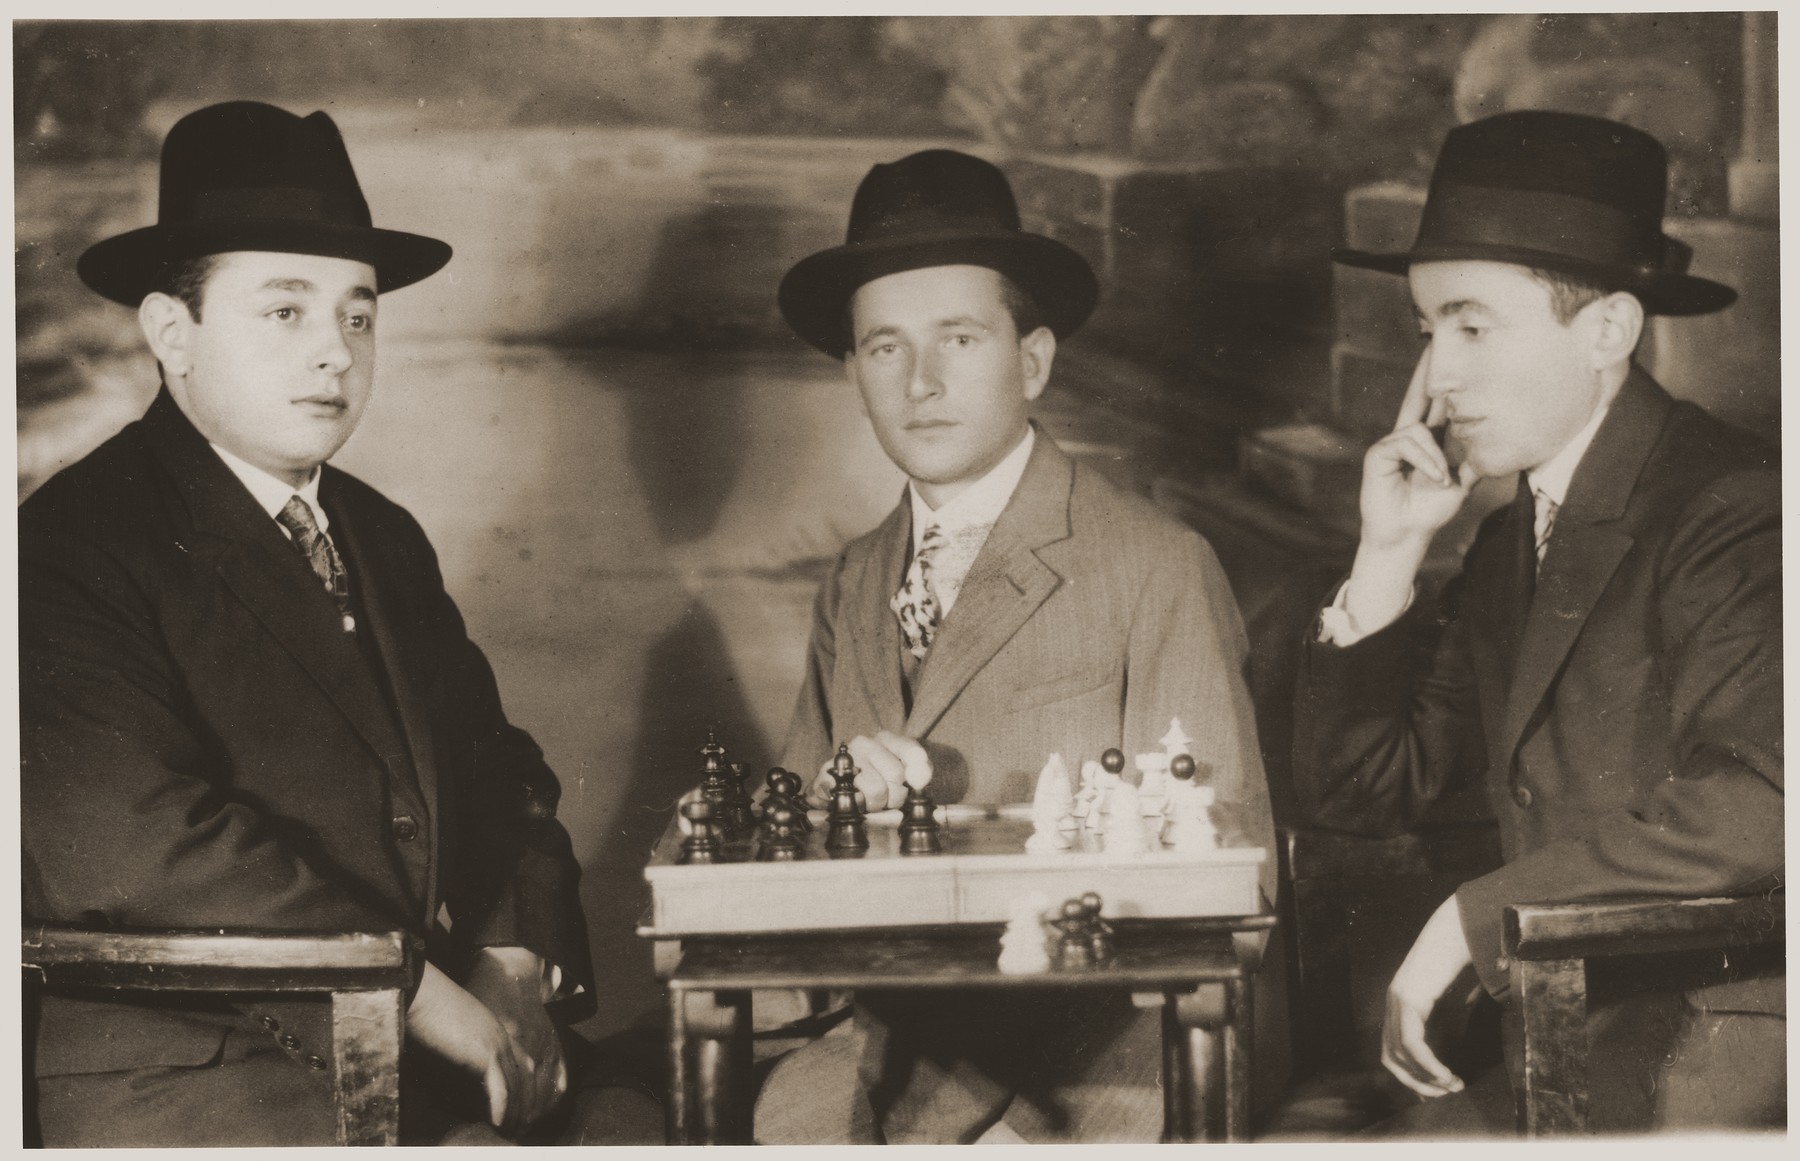 Yeshiva students playing chess.  

Pictured from left to right are Meir Goldschild and his cousins, Moses and Yisroel Klein.